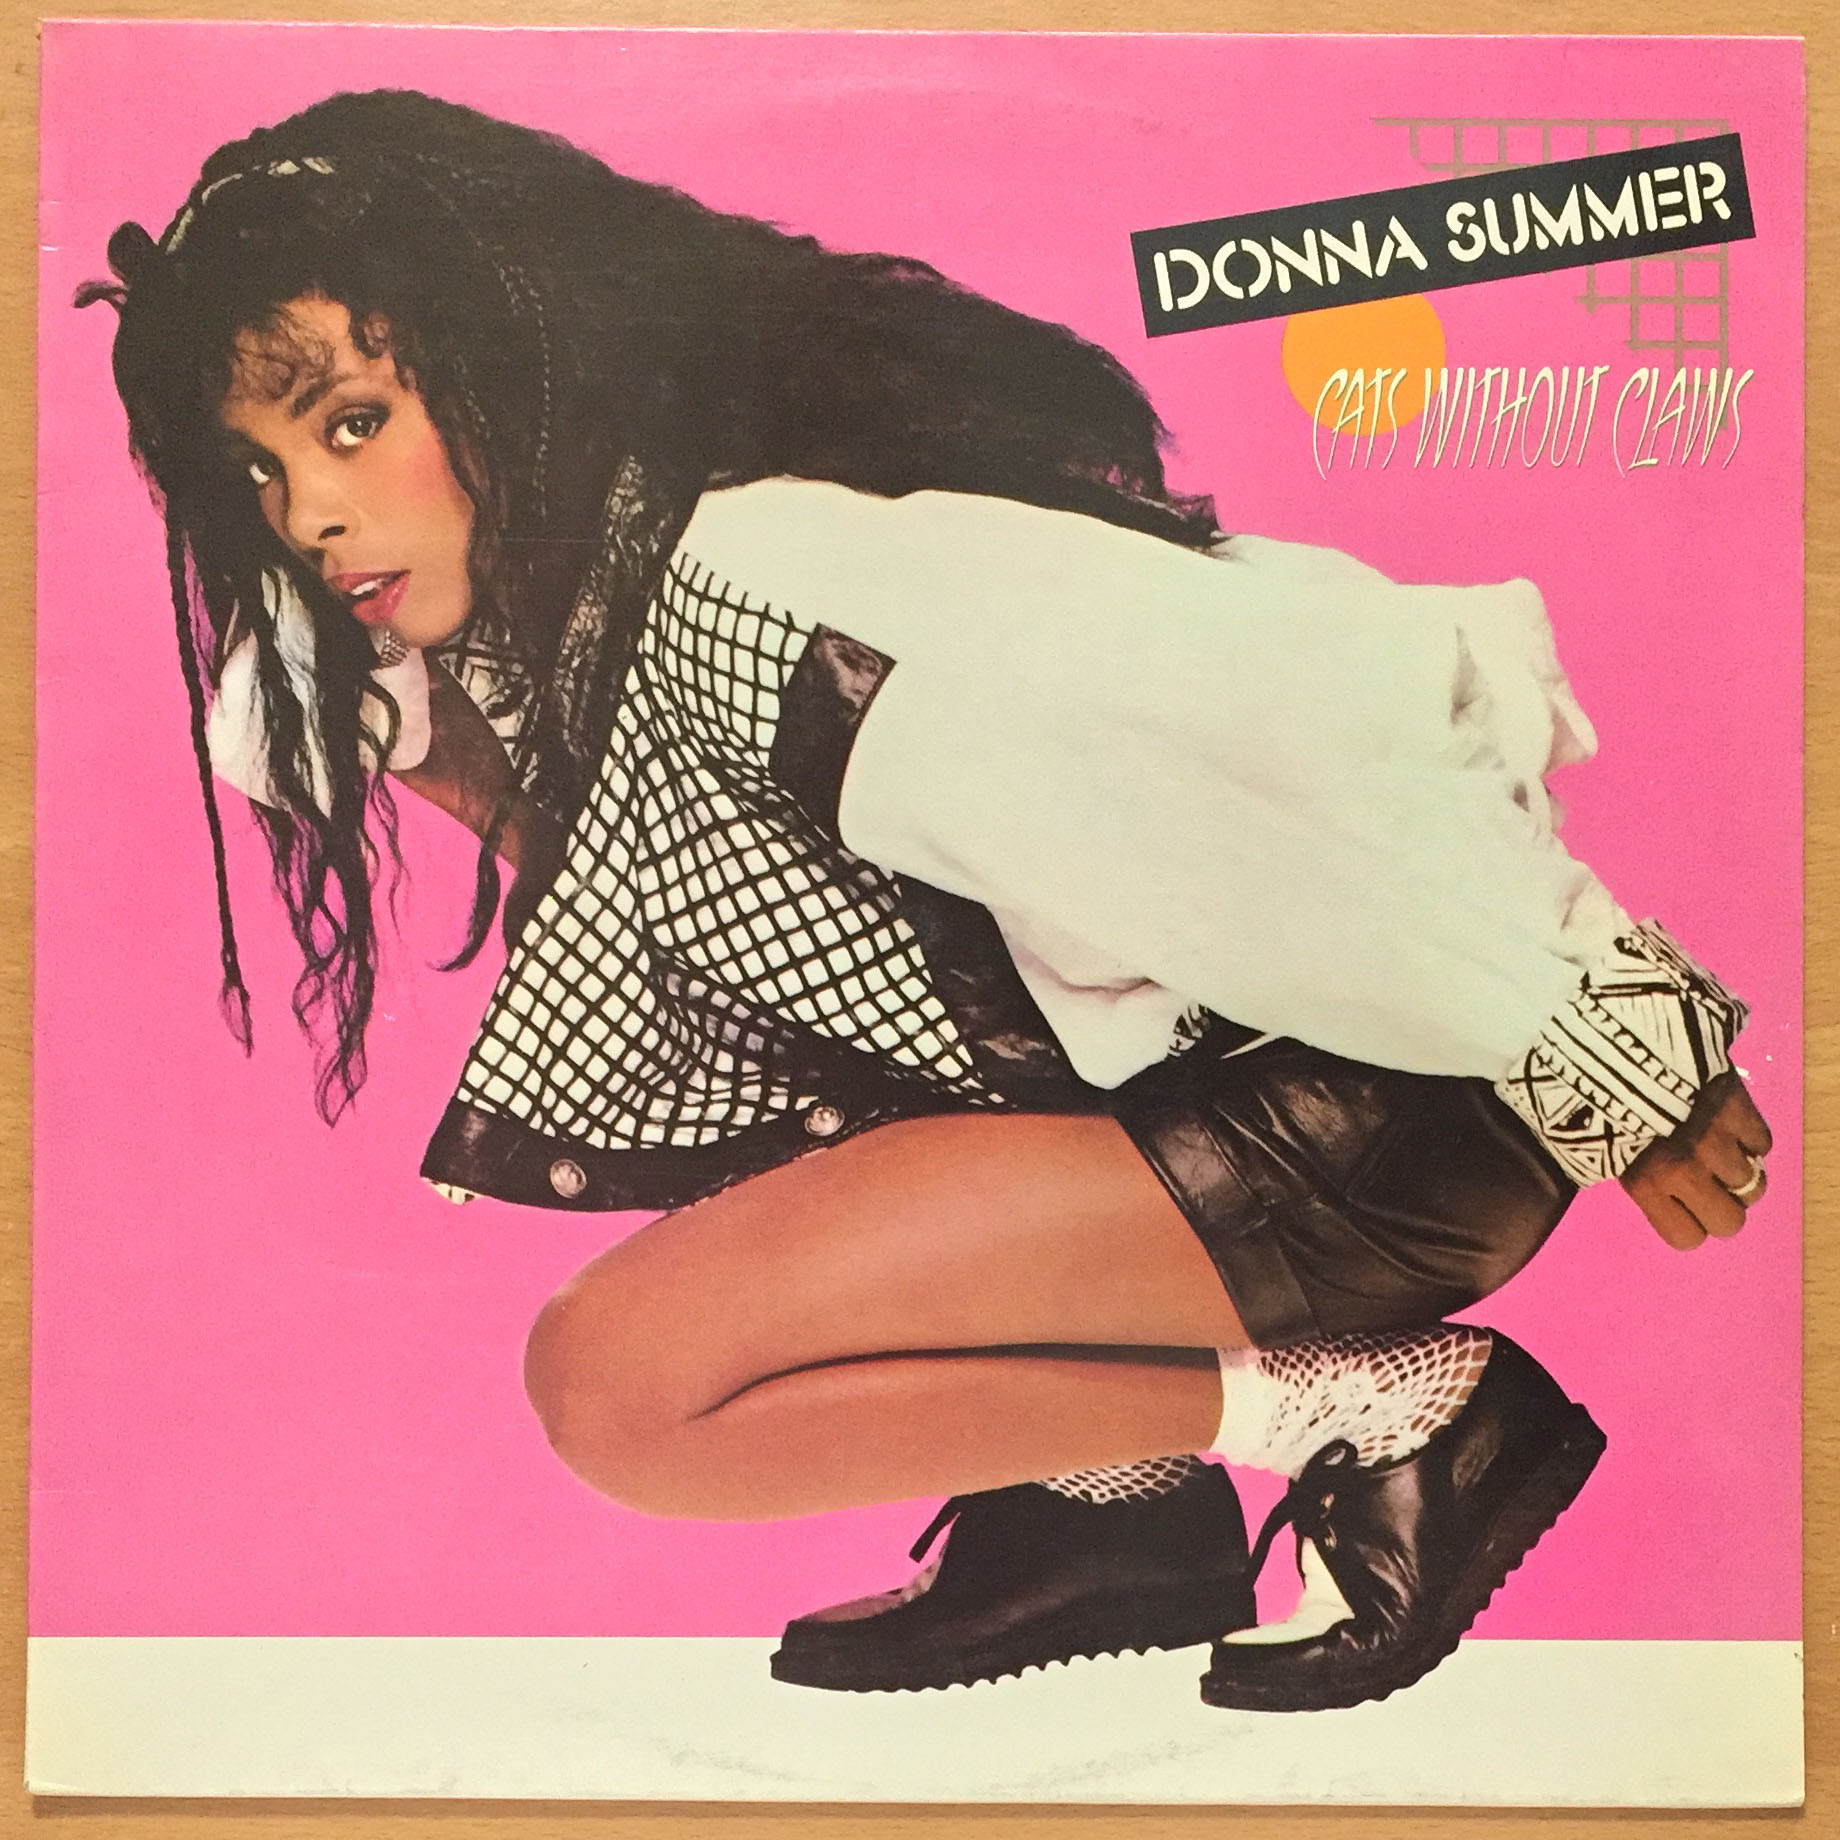 Donna Summer-Cats whitout claws. 1984 Warner Bros